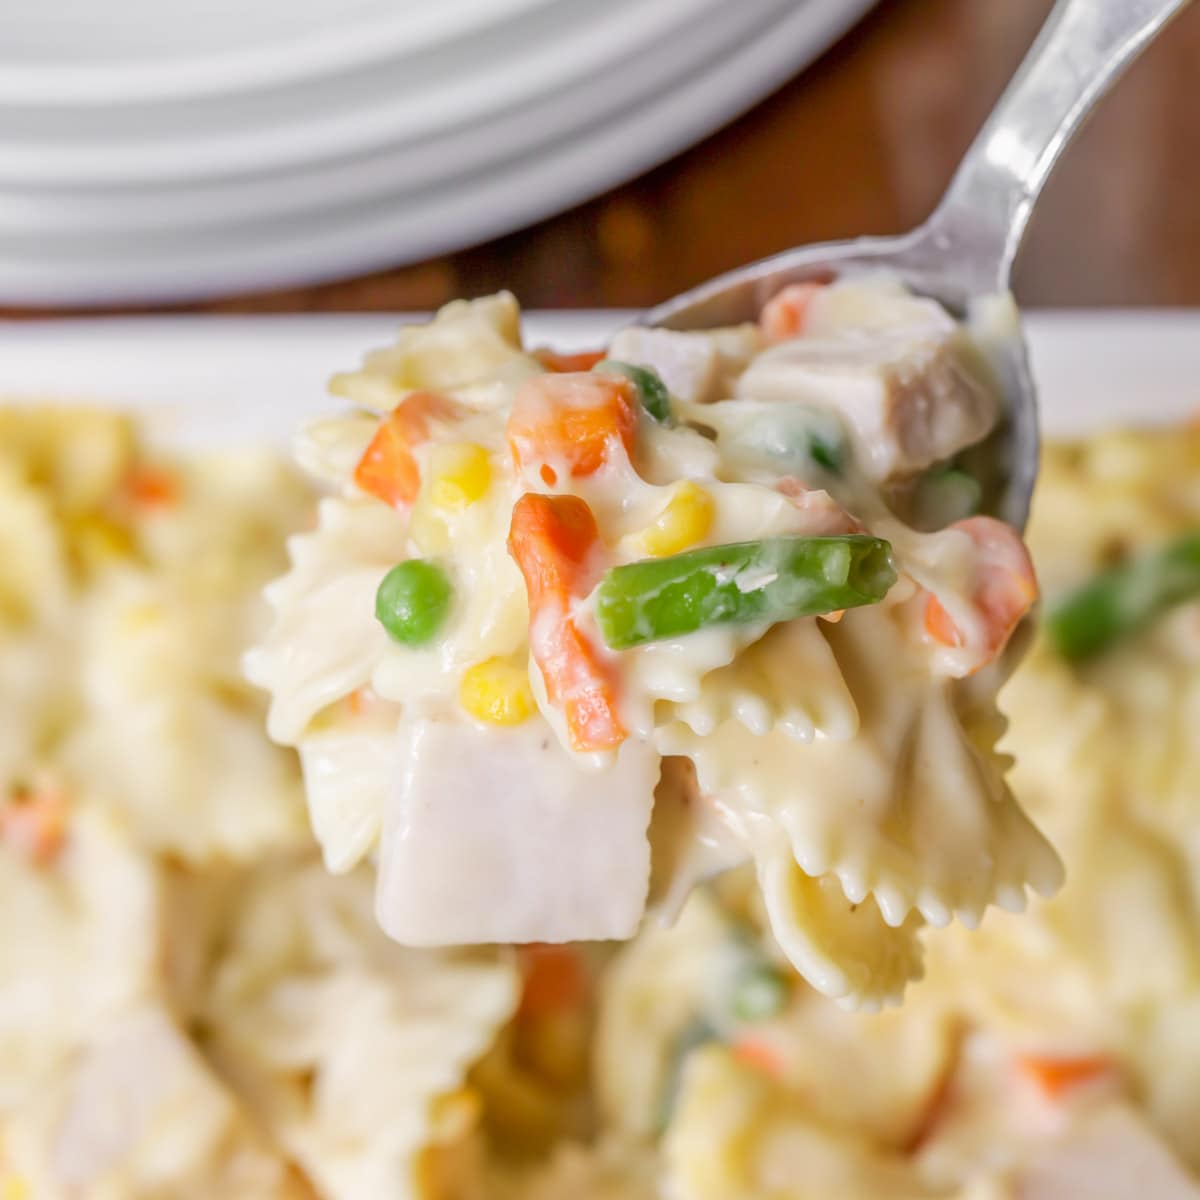 Leftover turkey recipes - a spoon full of creamy turkey and noodles.